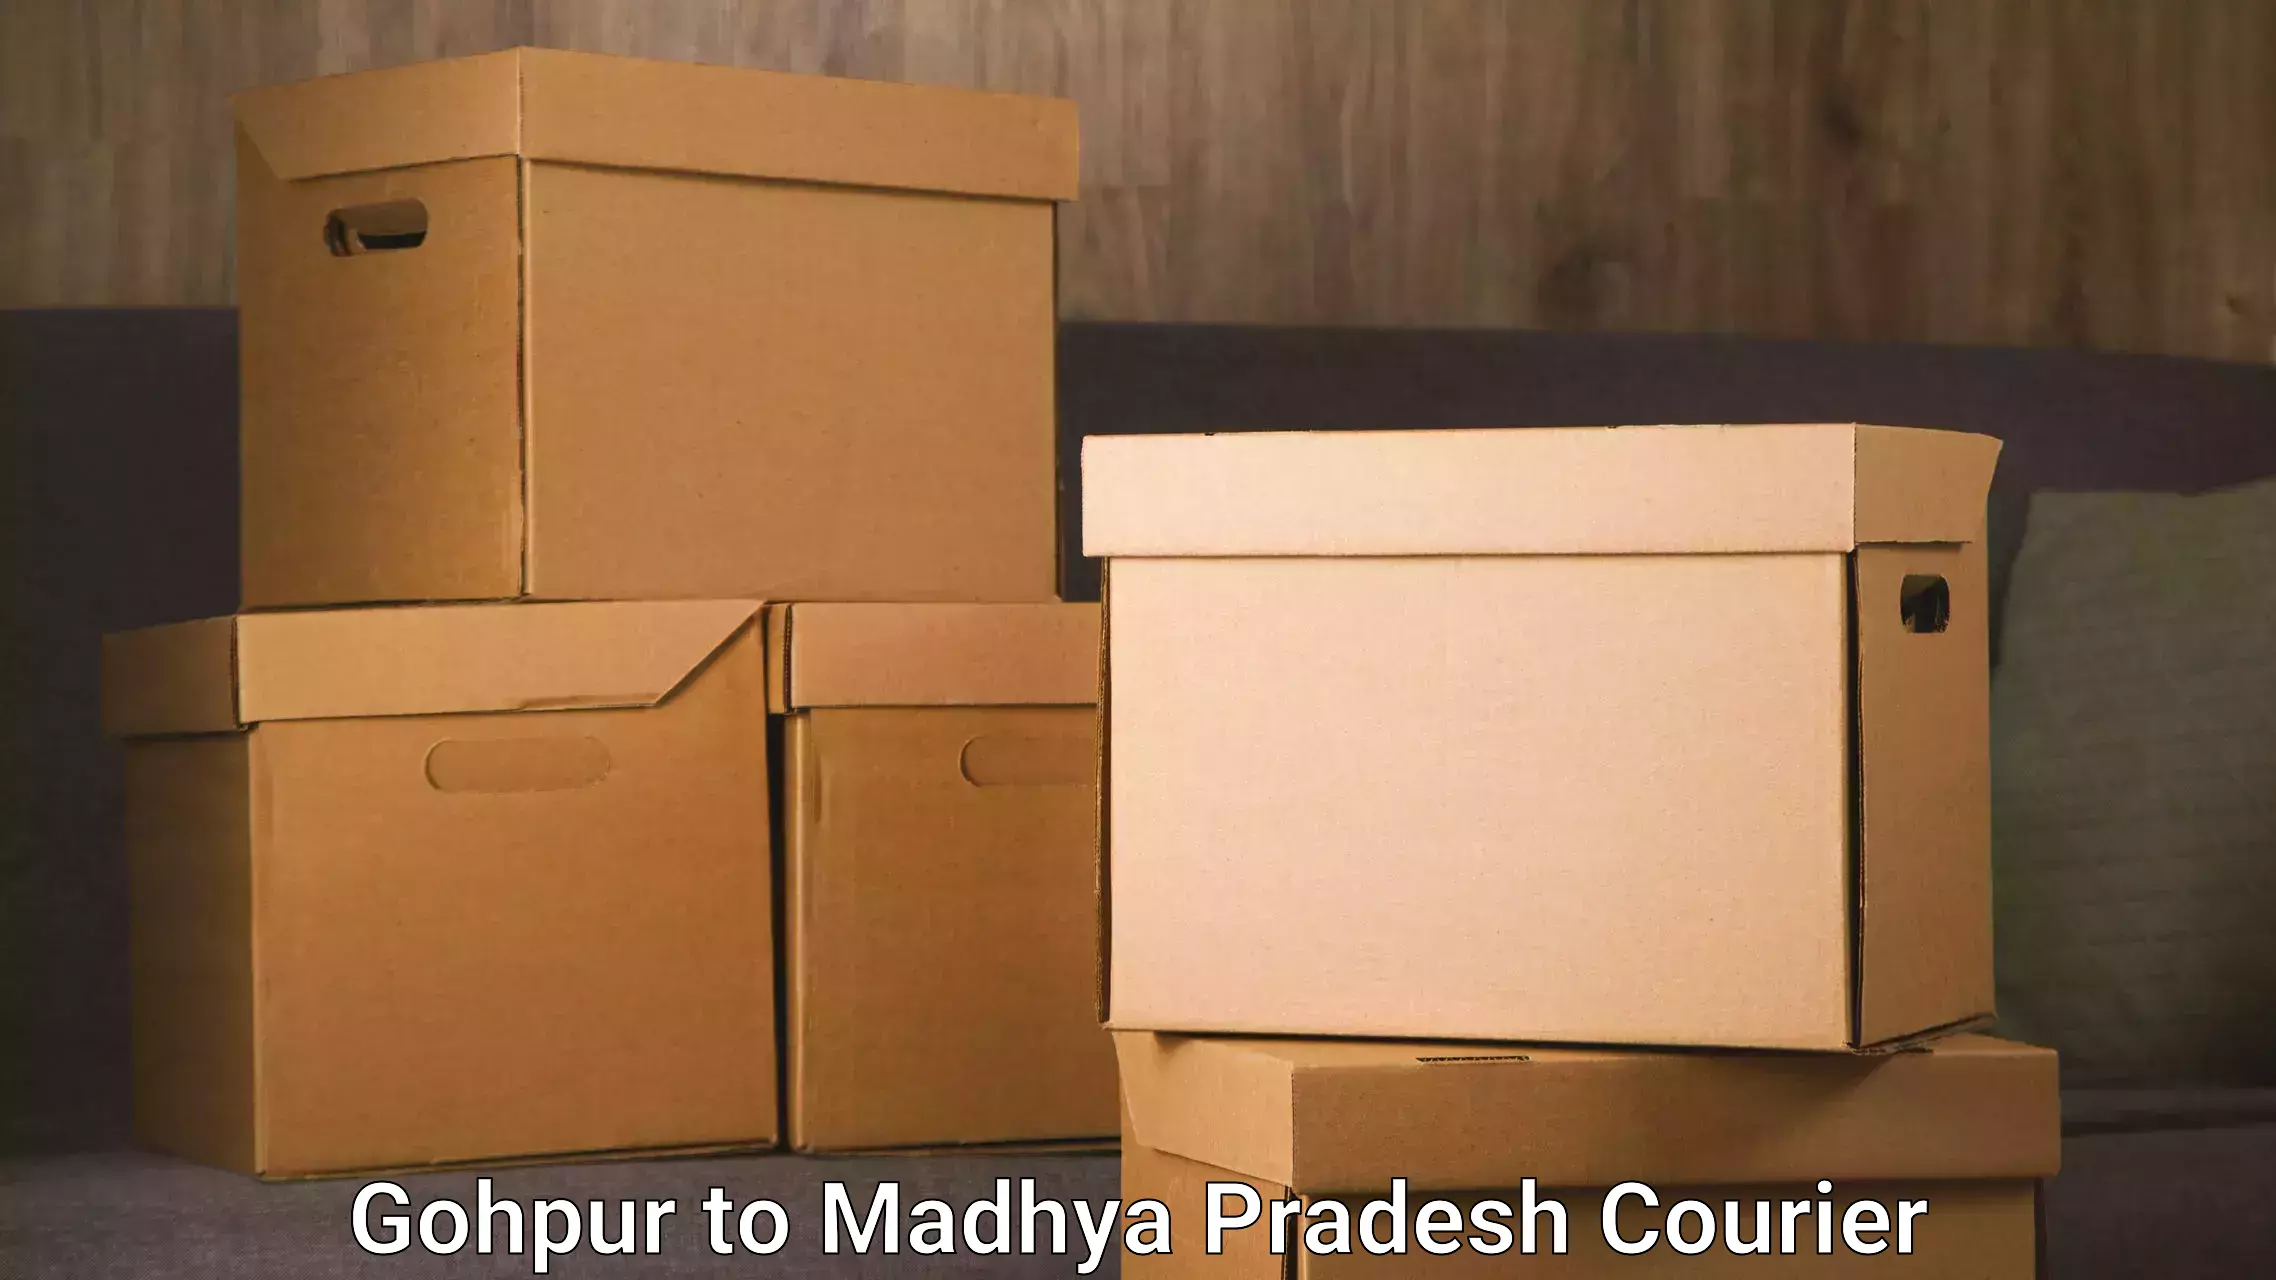 Ocean freight courier in Gohpur to Madhya Pradesh